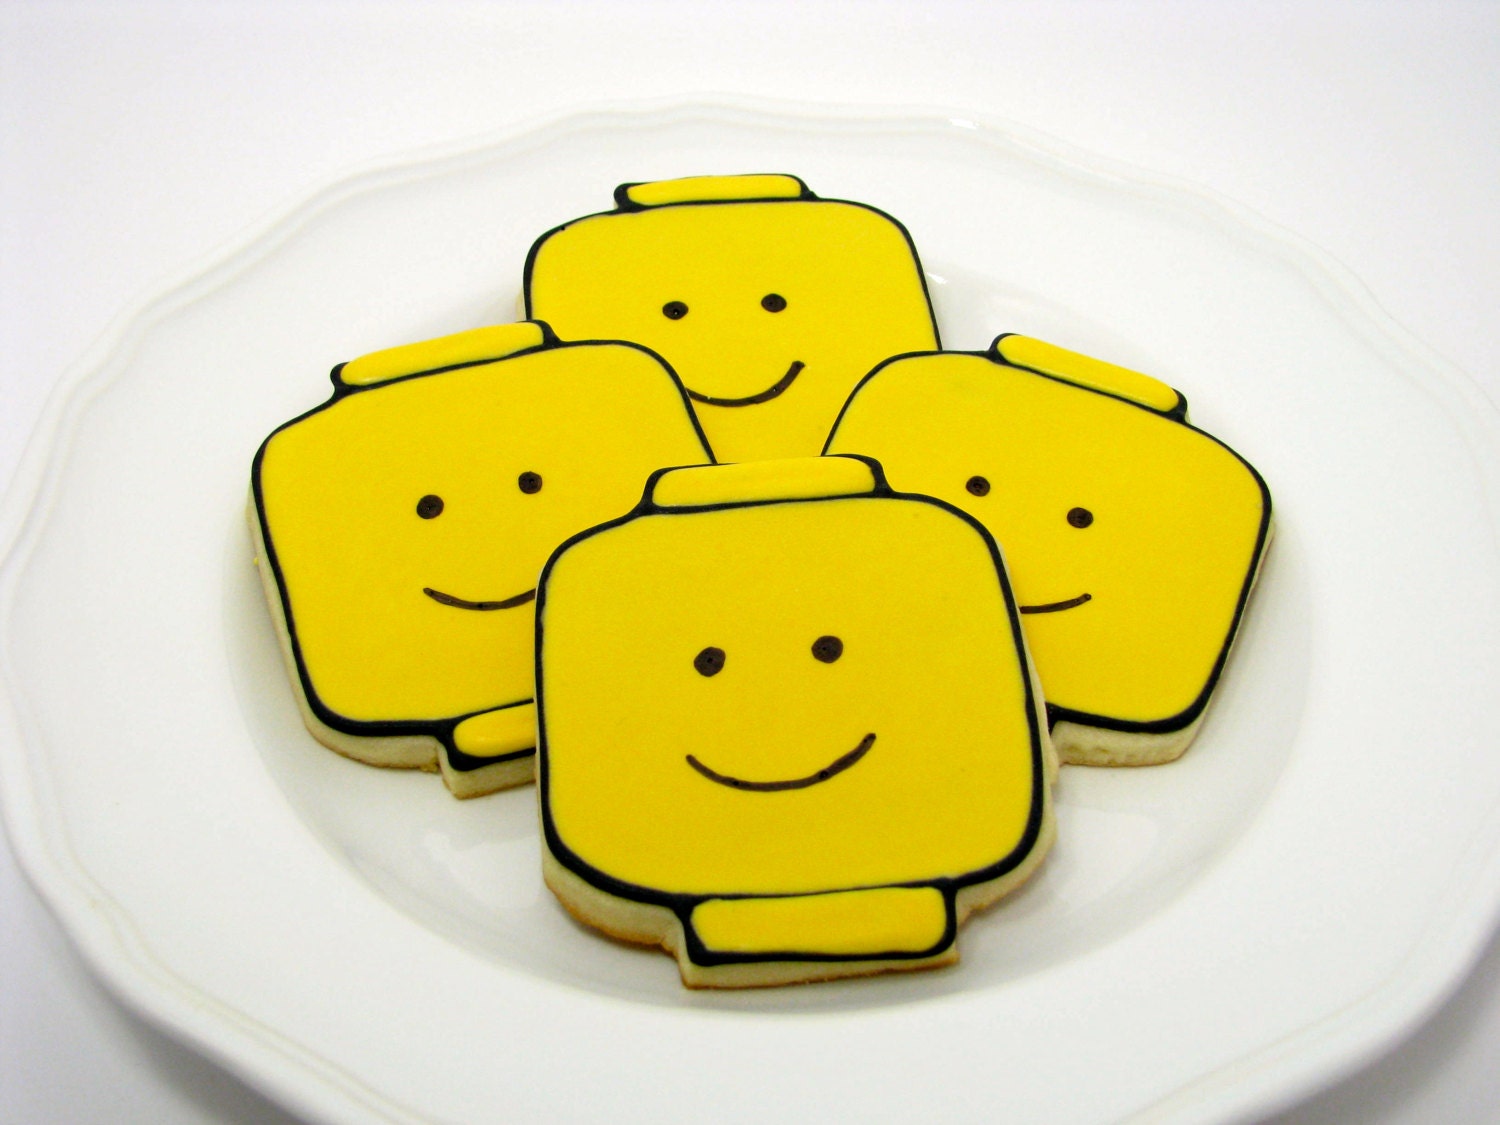 Lego Man Sugar Cookies-Perfect for a Lego Party! - MrsCookieBakes